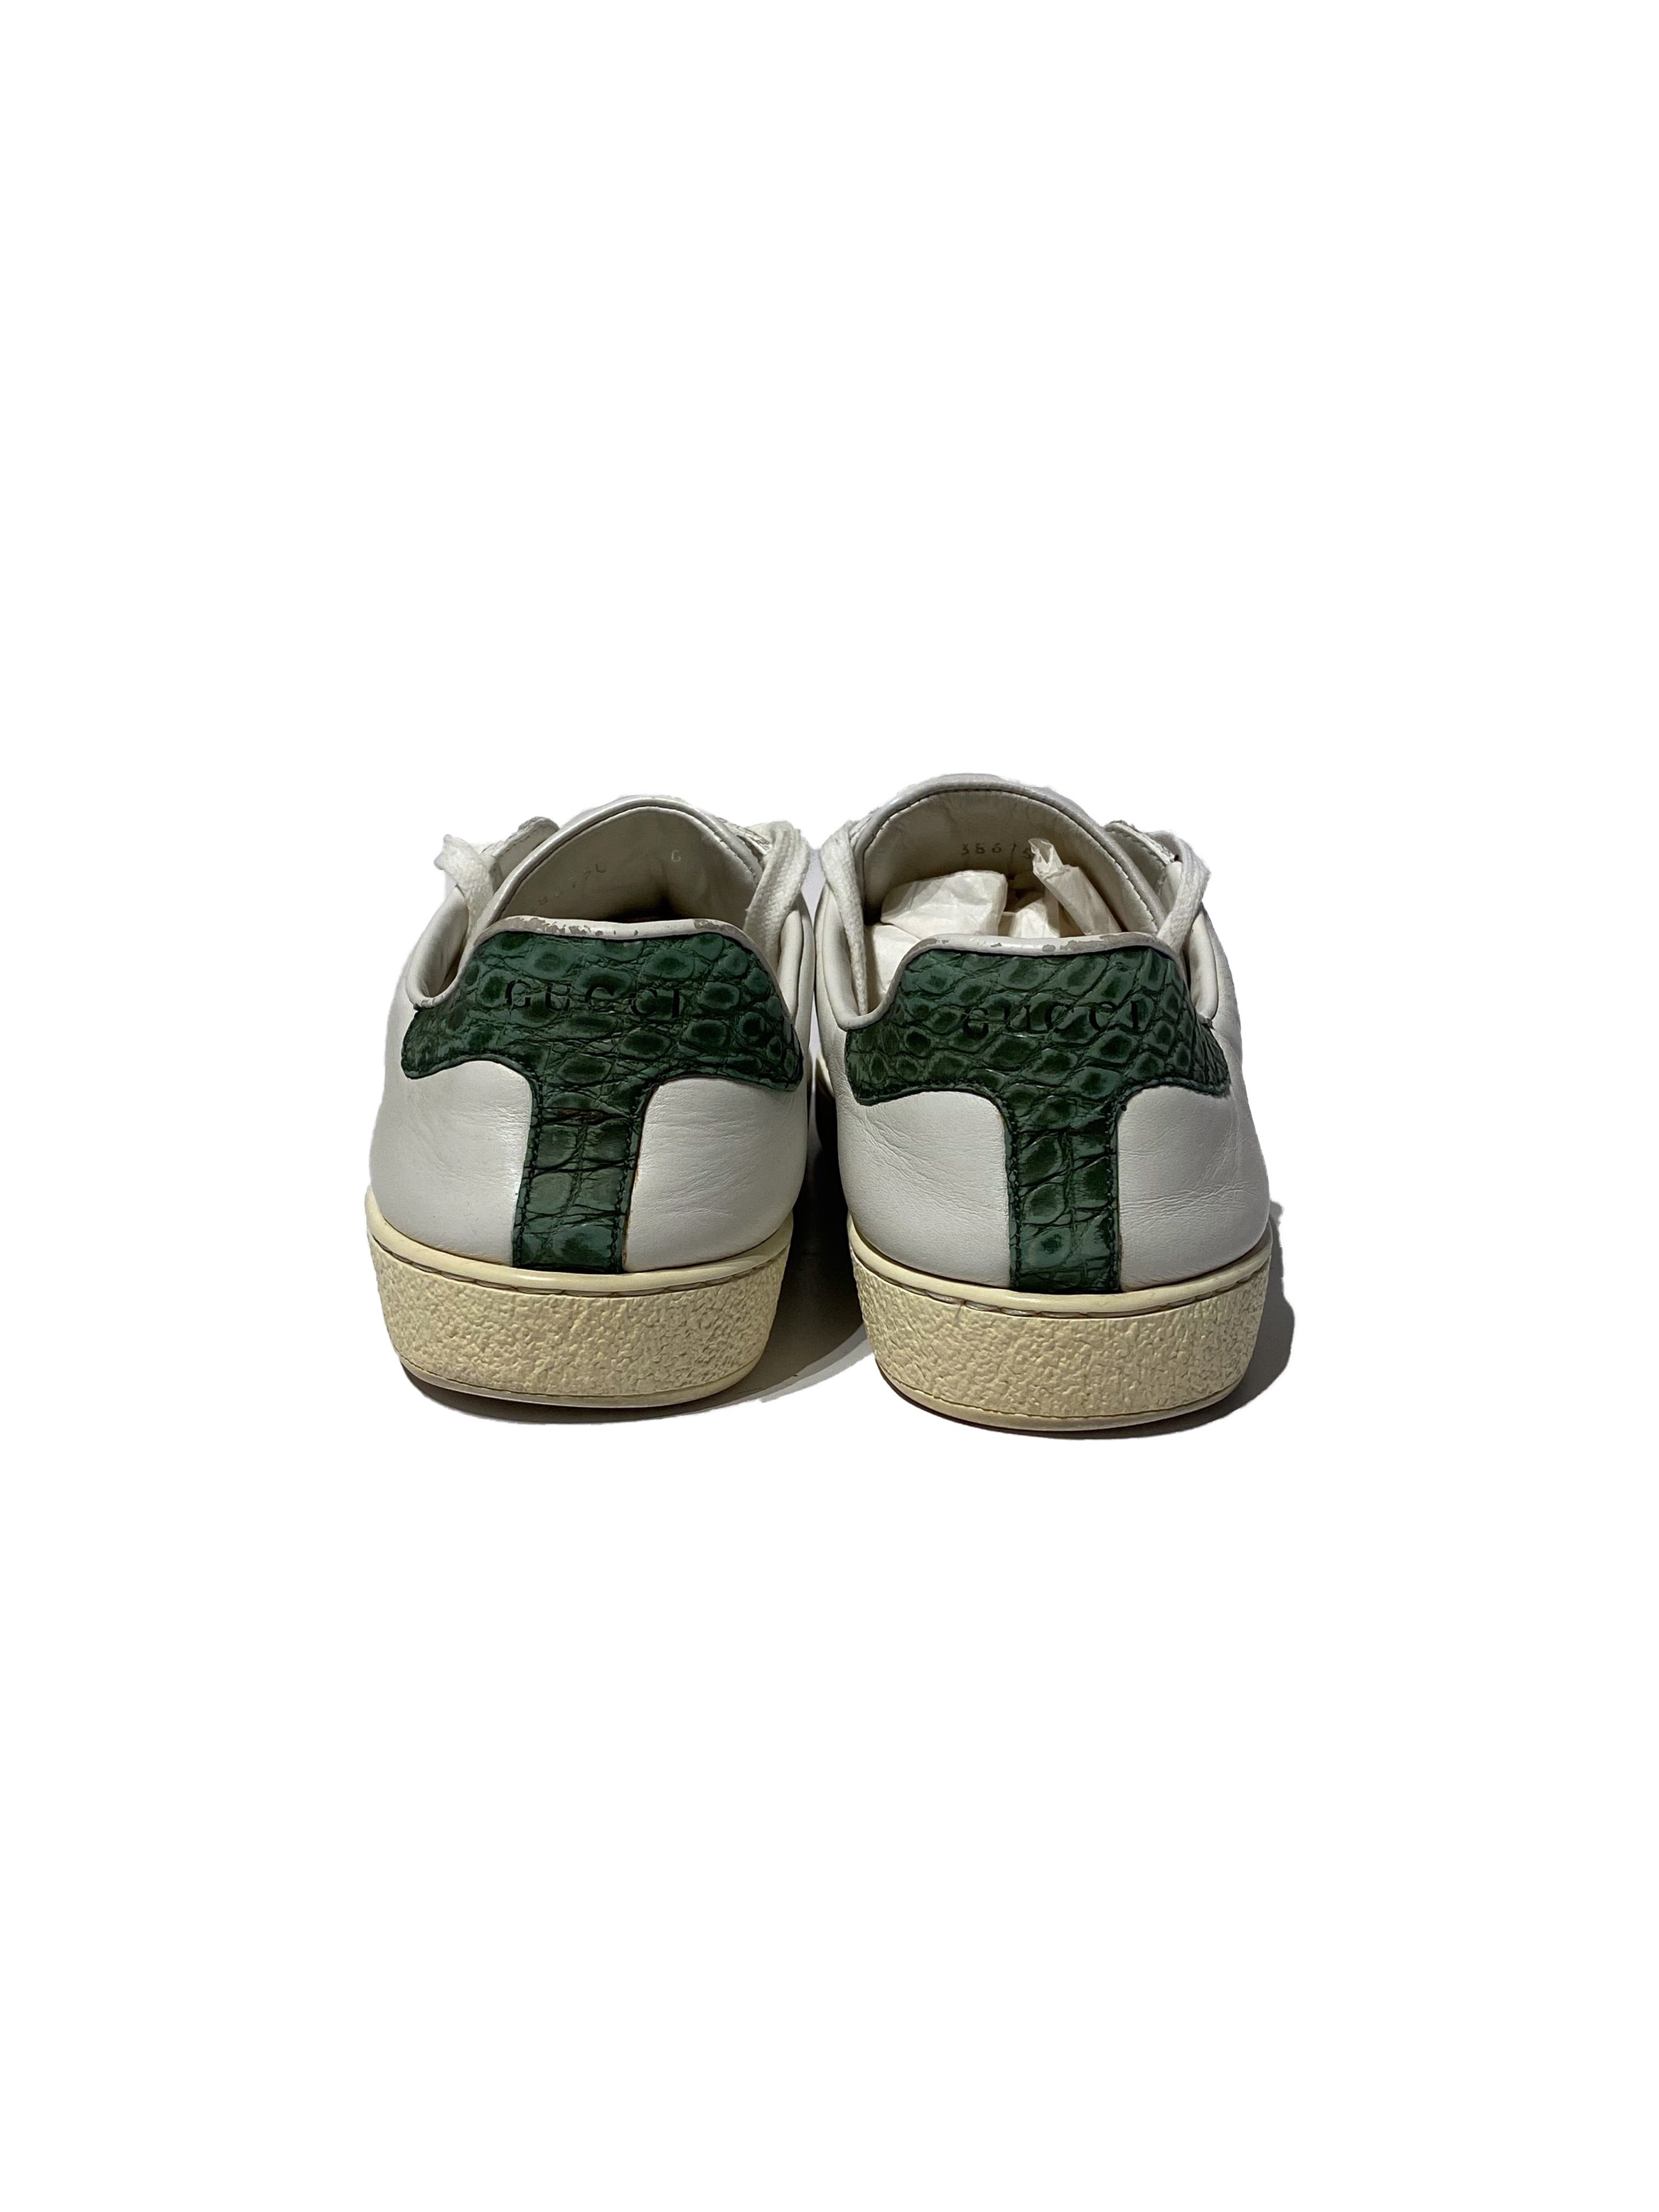 Gucci Ace Sneakers - Size 6 G